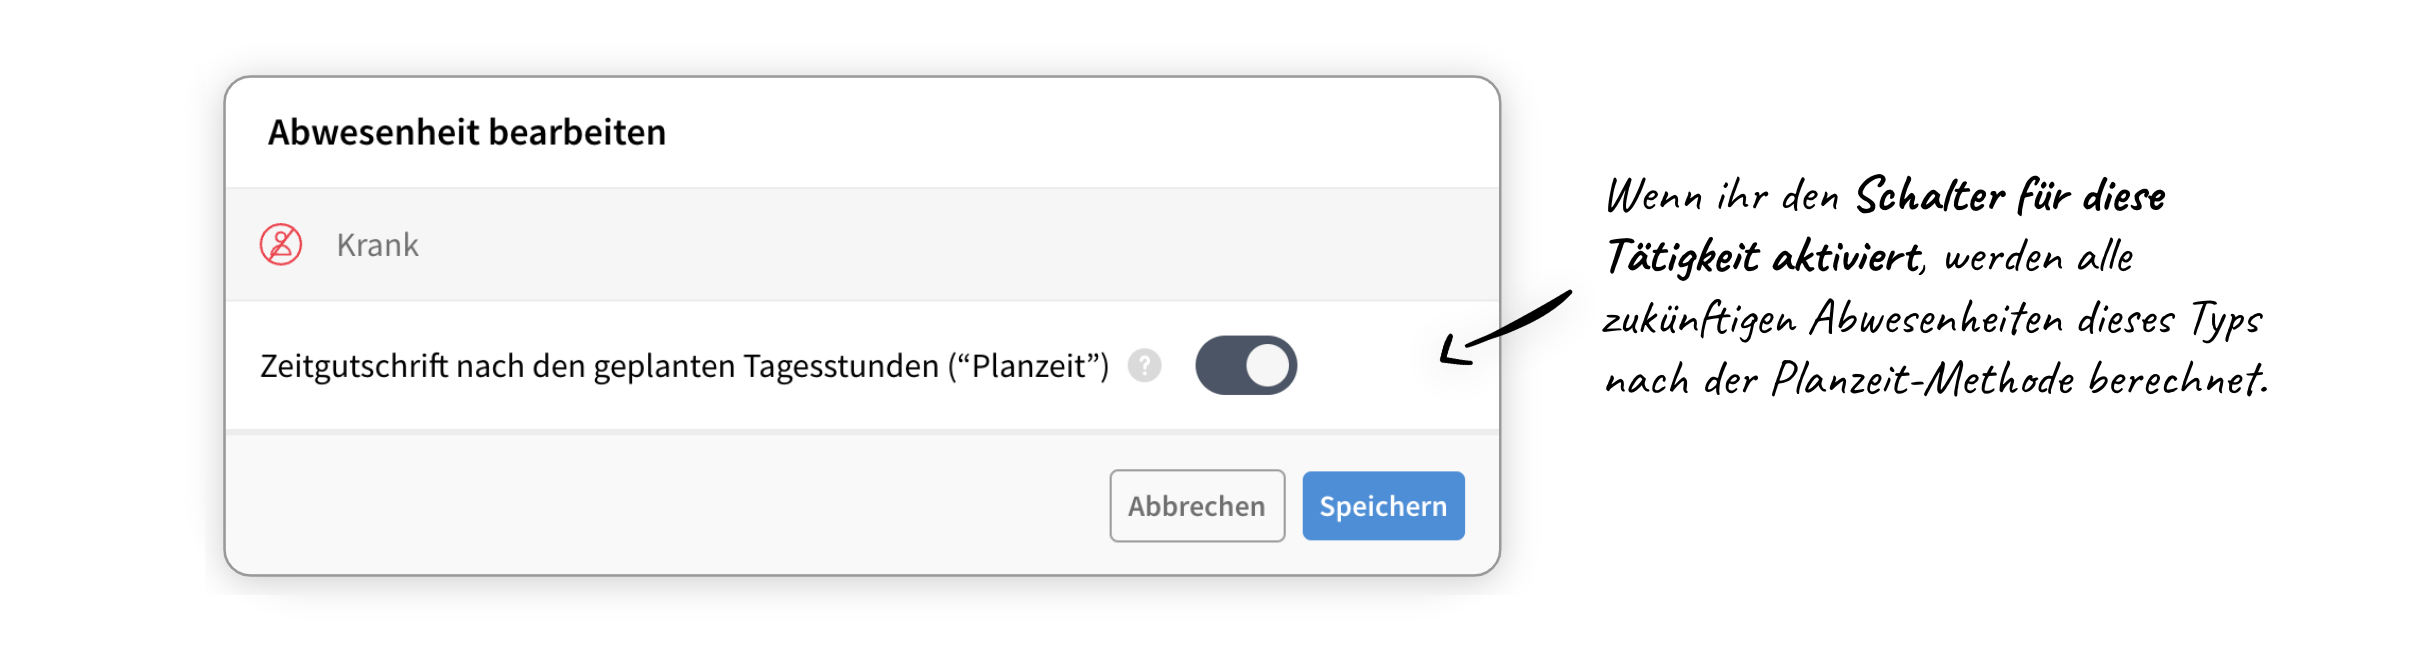 https://hilfe.apocollect.de/storage/images/pep/toggle-abwesenheit.png